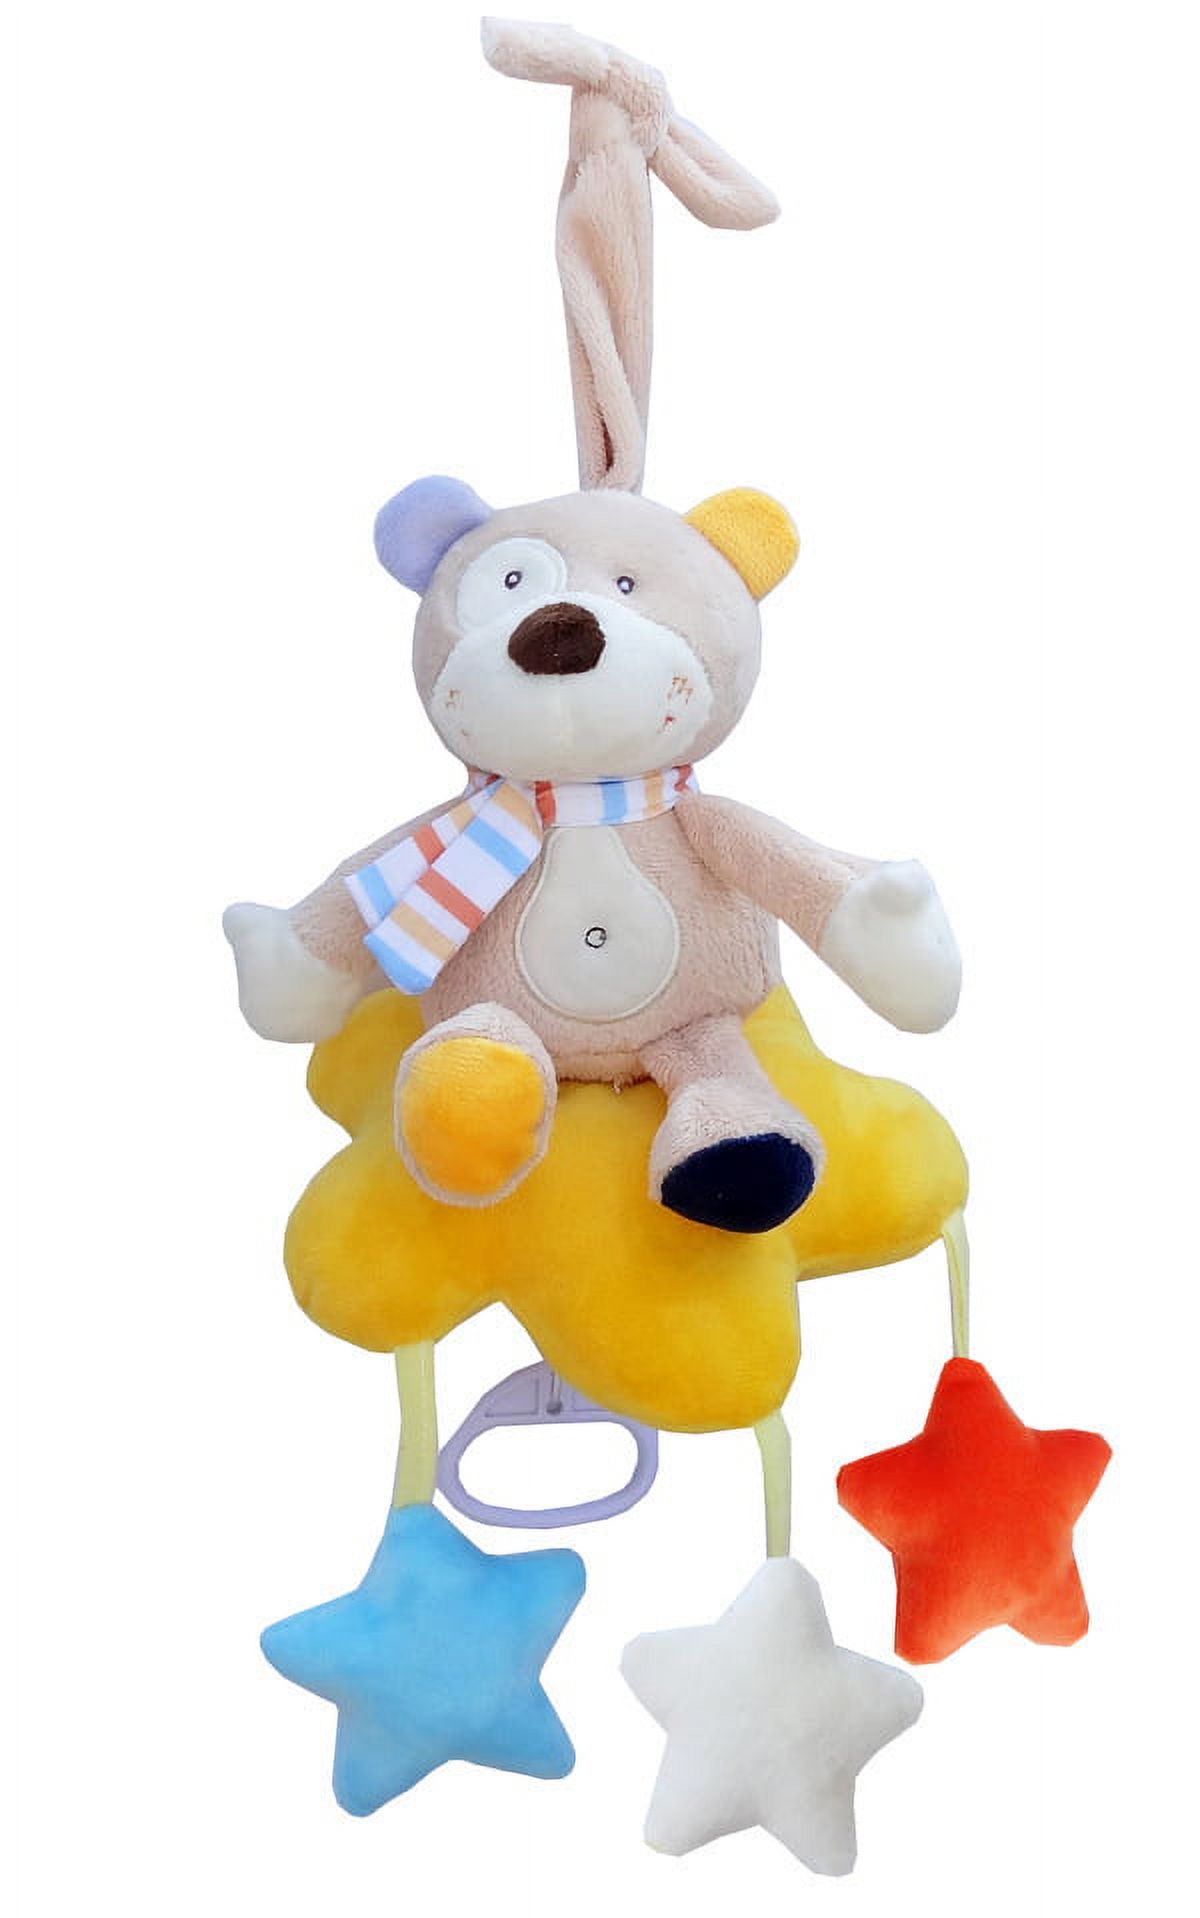 Crib/Stroller Toy with Music - Bear - image 1 of 4